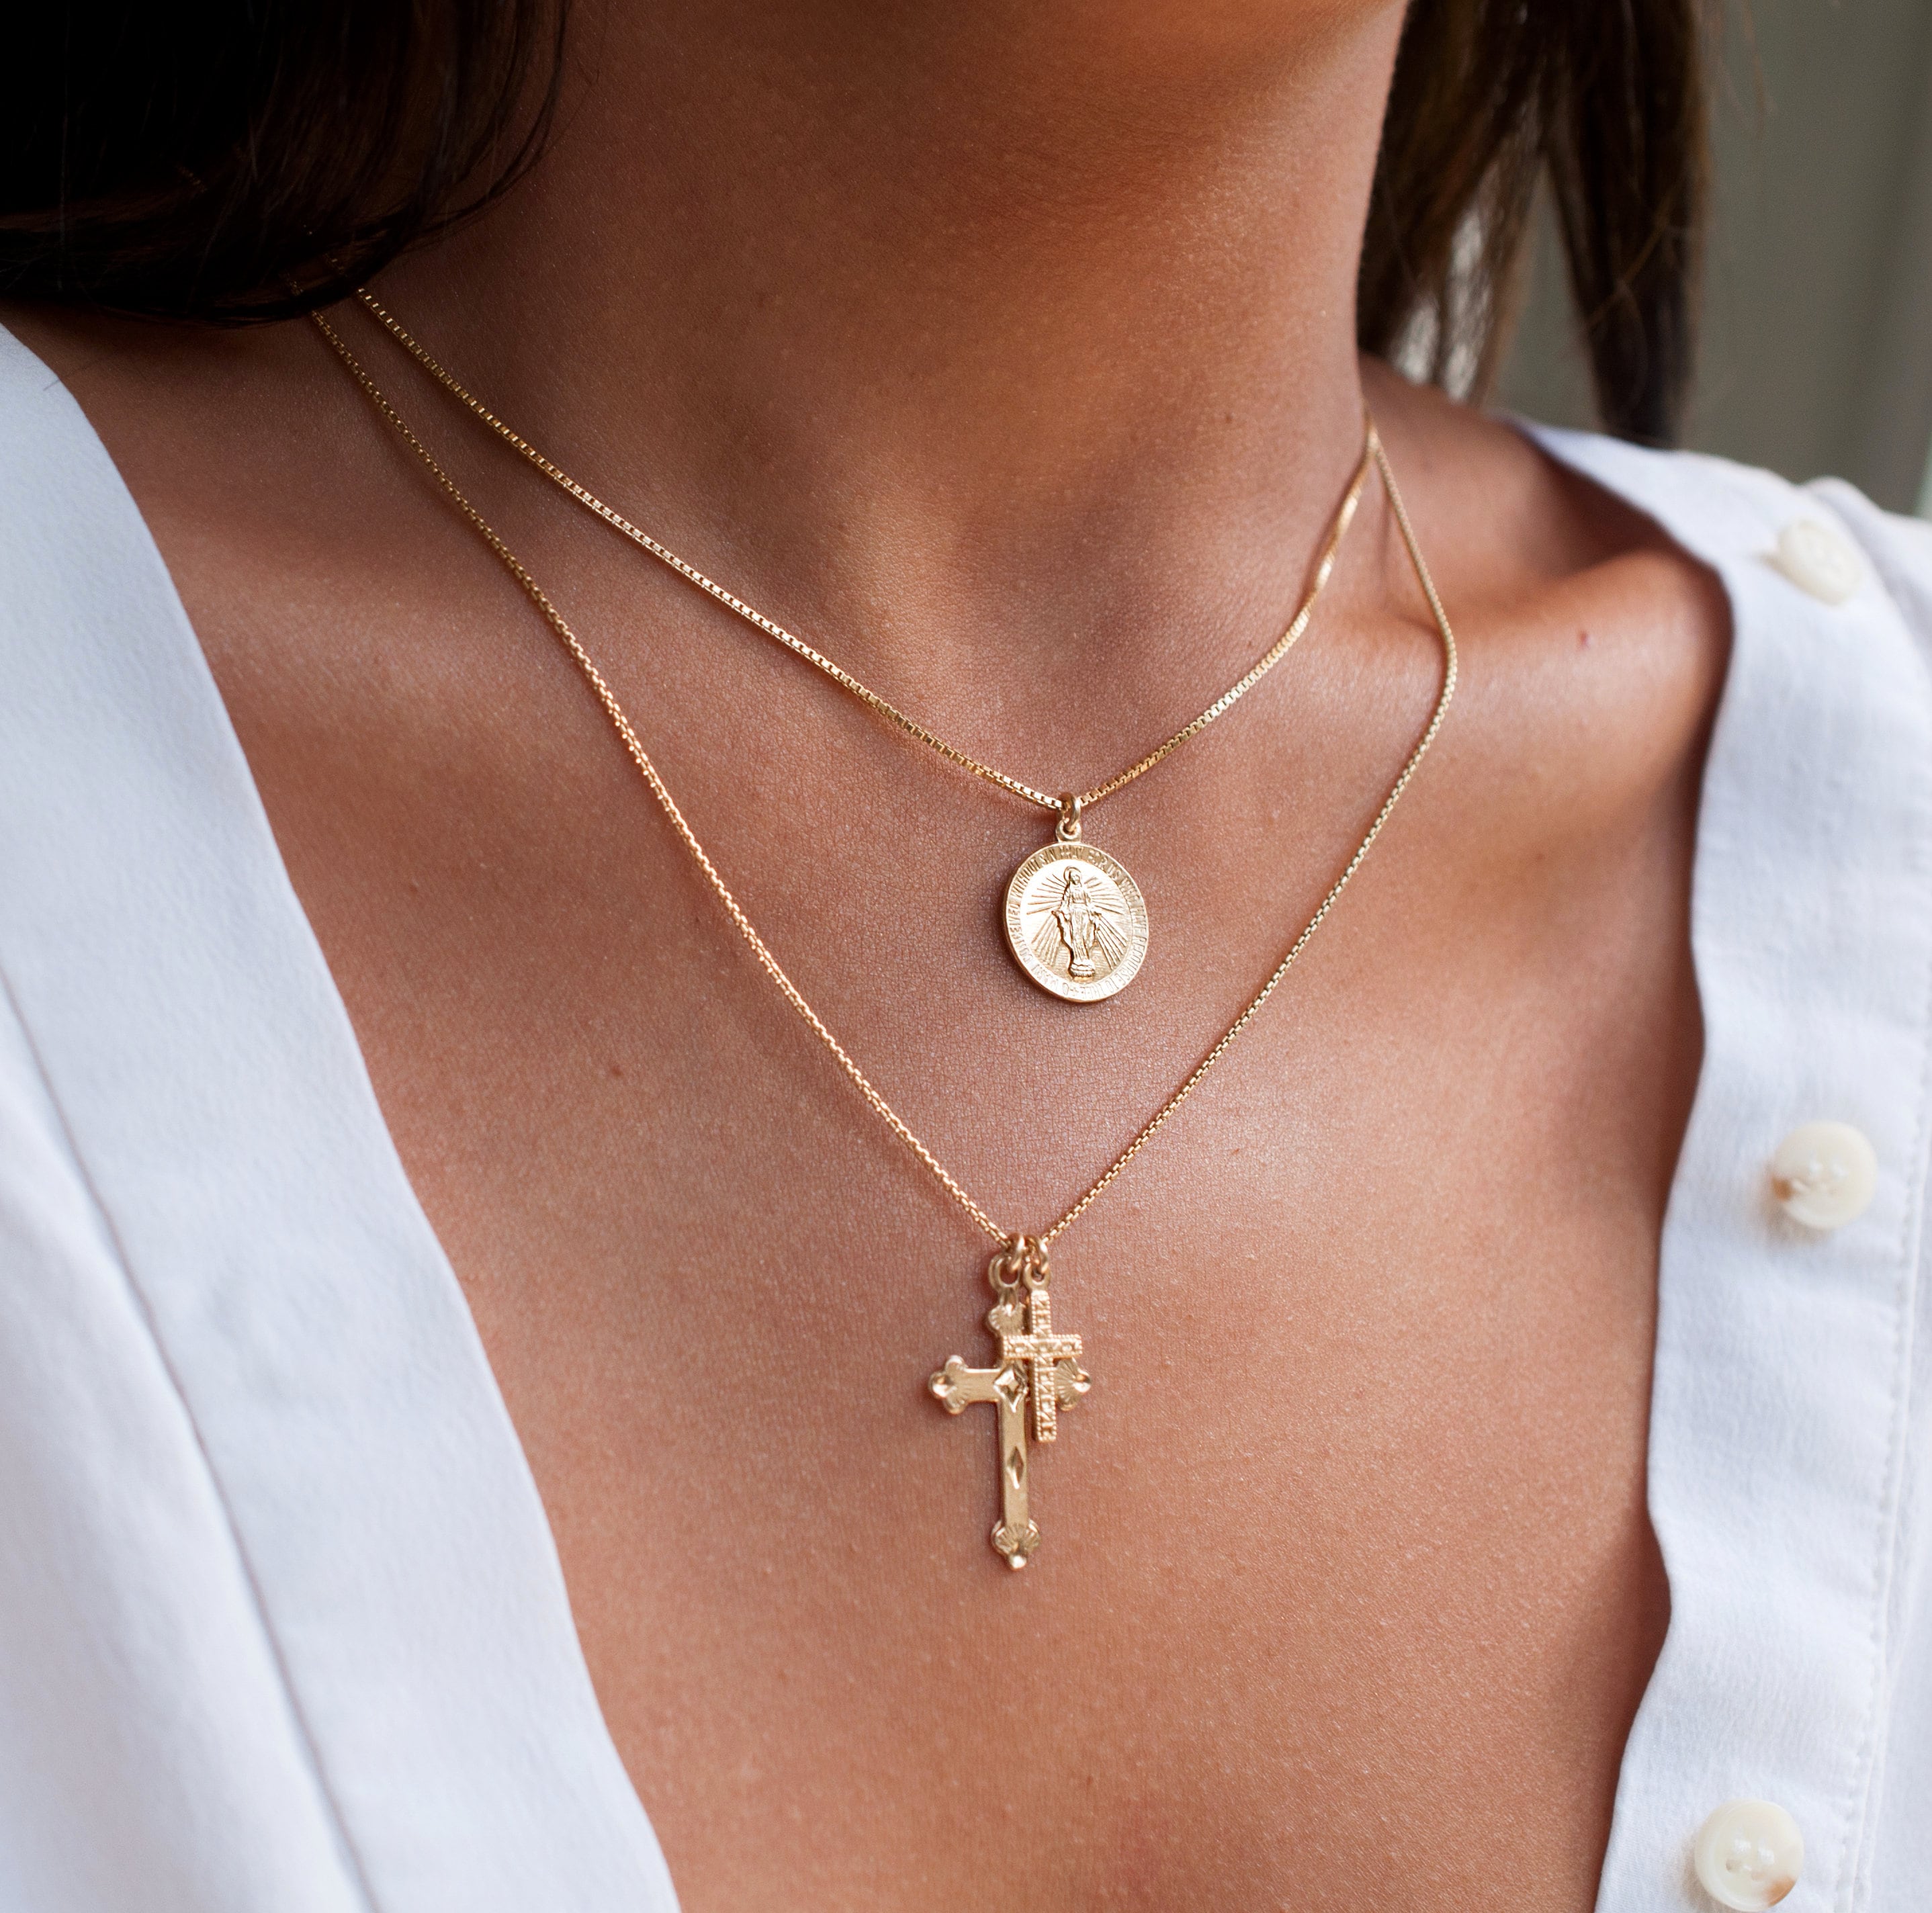 The Chosen One Double Cross Necklace – TBJ